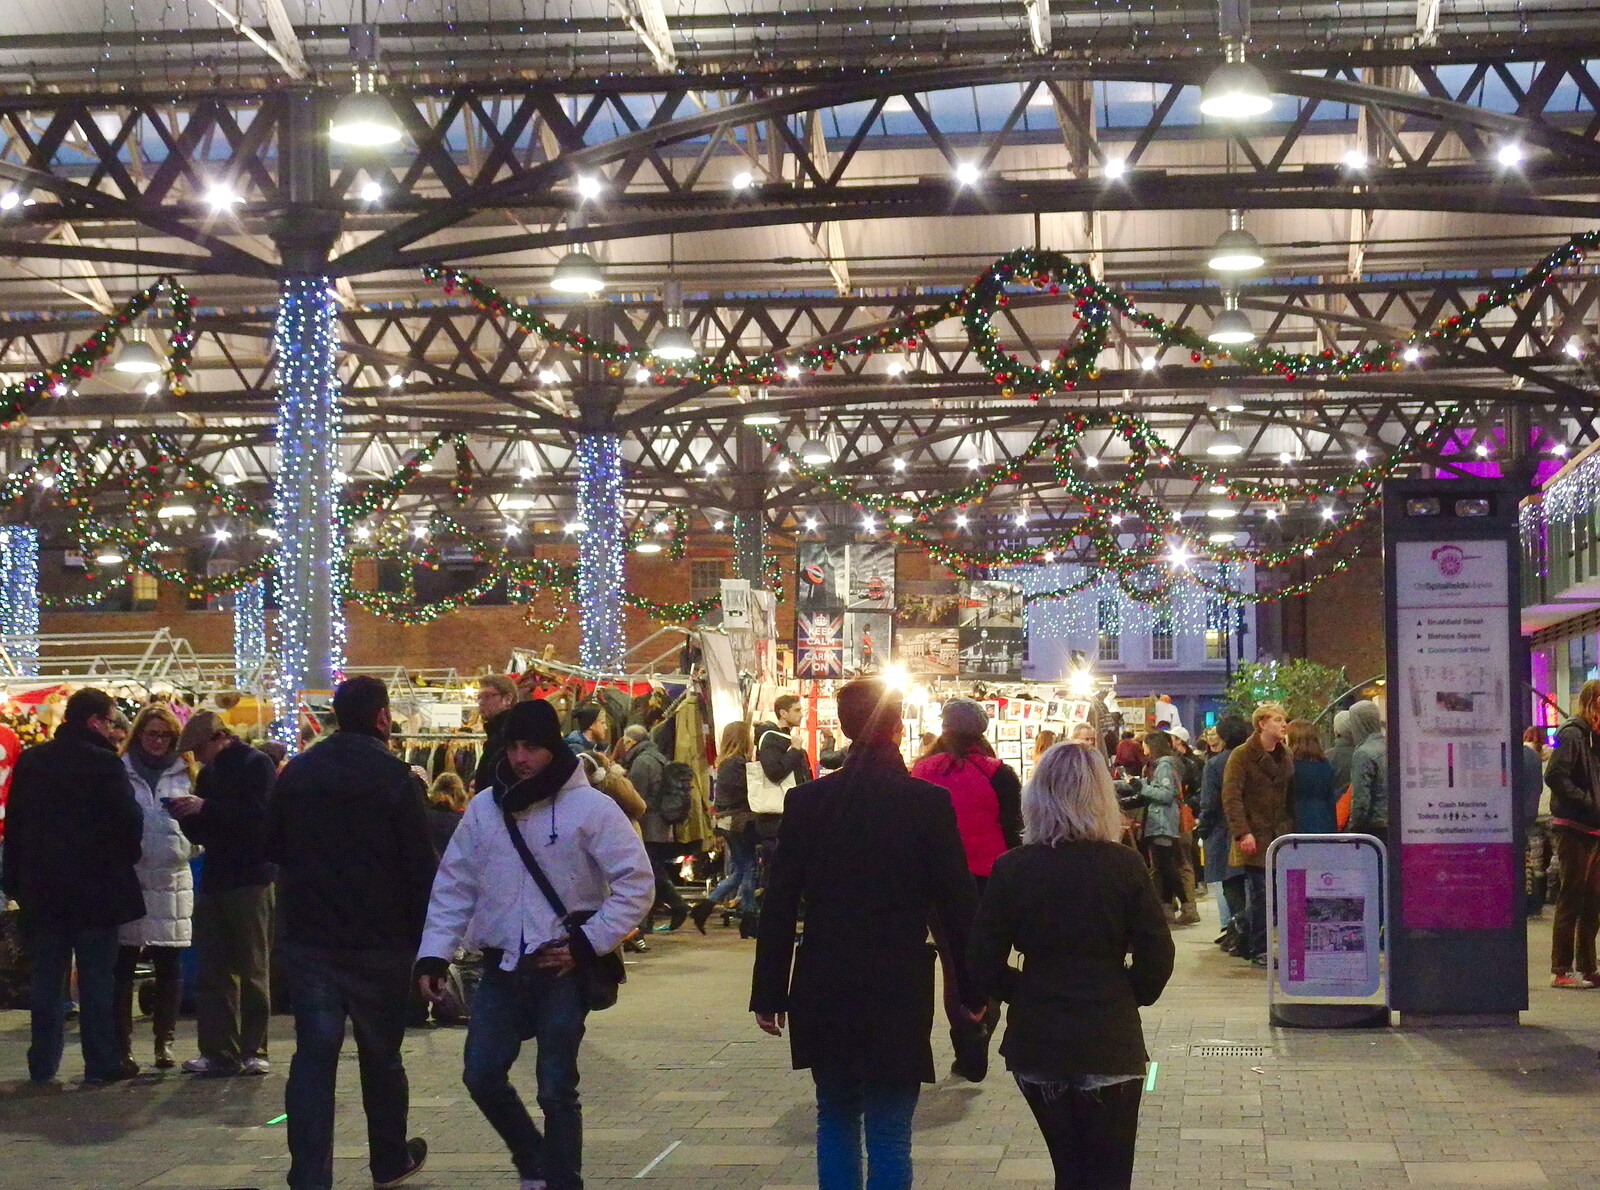 Spitalfields Market has Christmas decorations up from Lunch in the East End, Spitalfields and Brick Lane, London - 1st December 2013